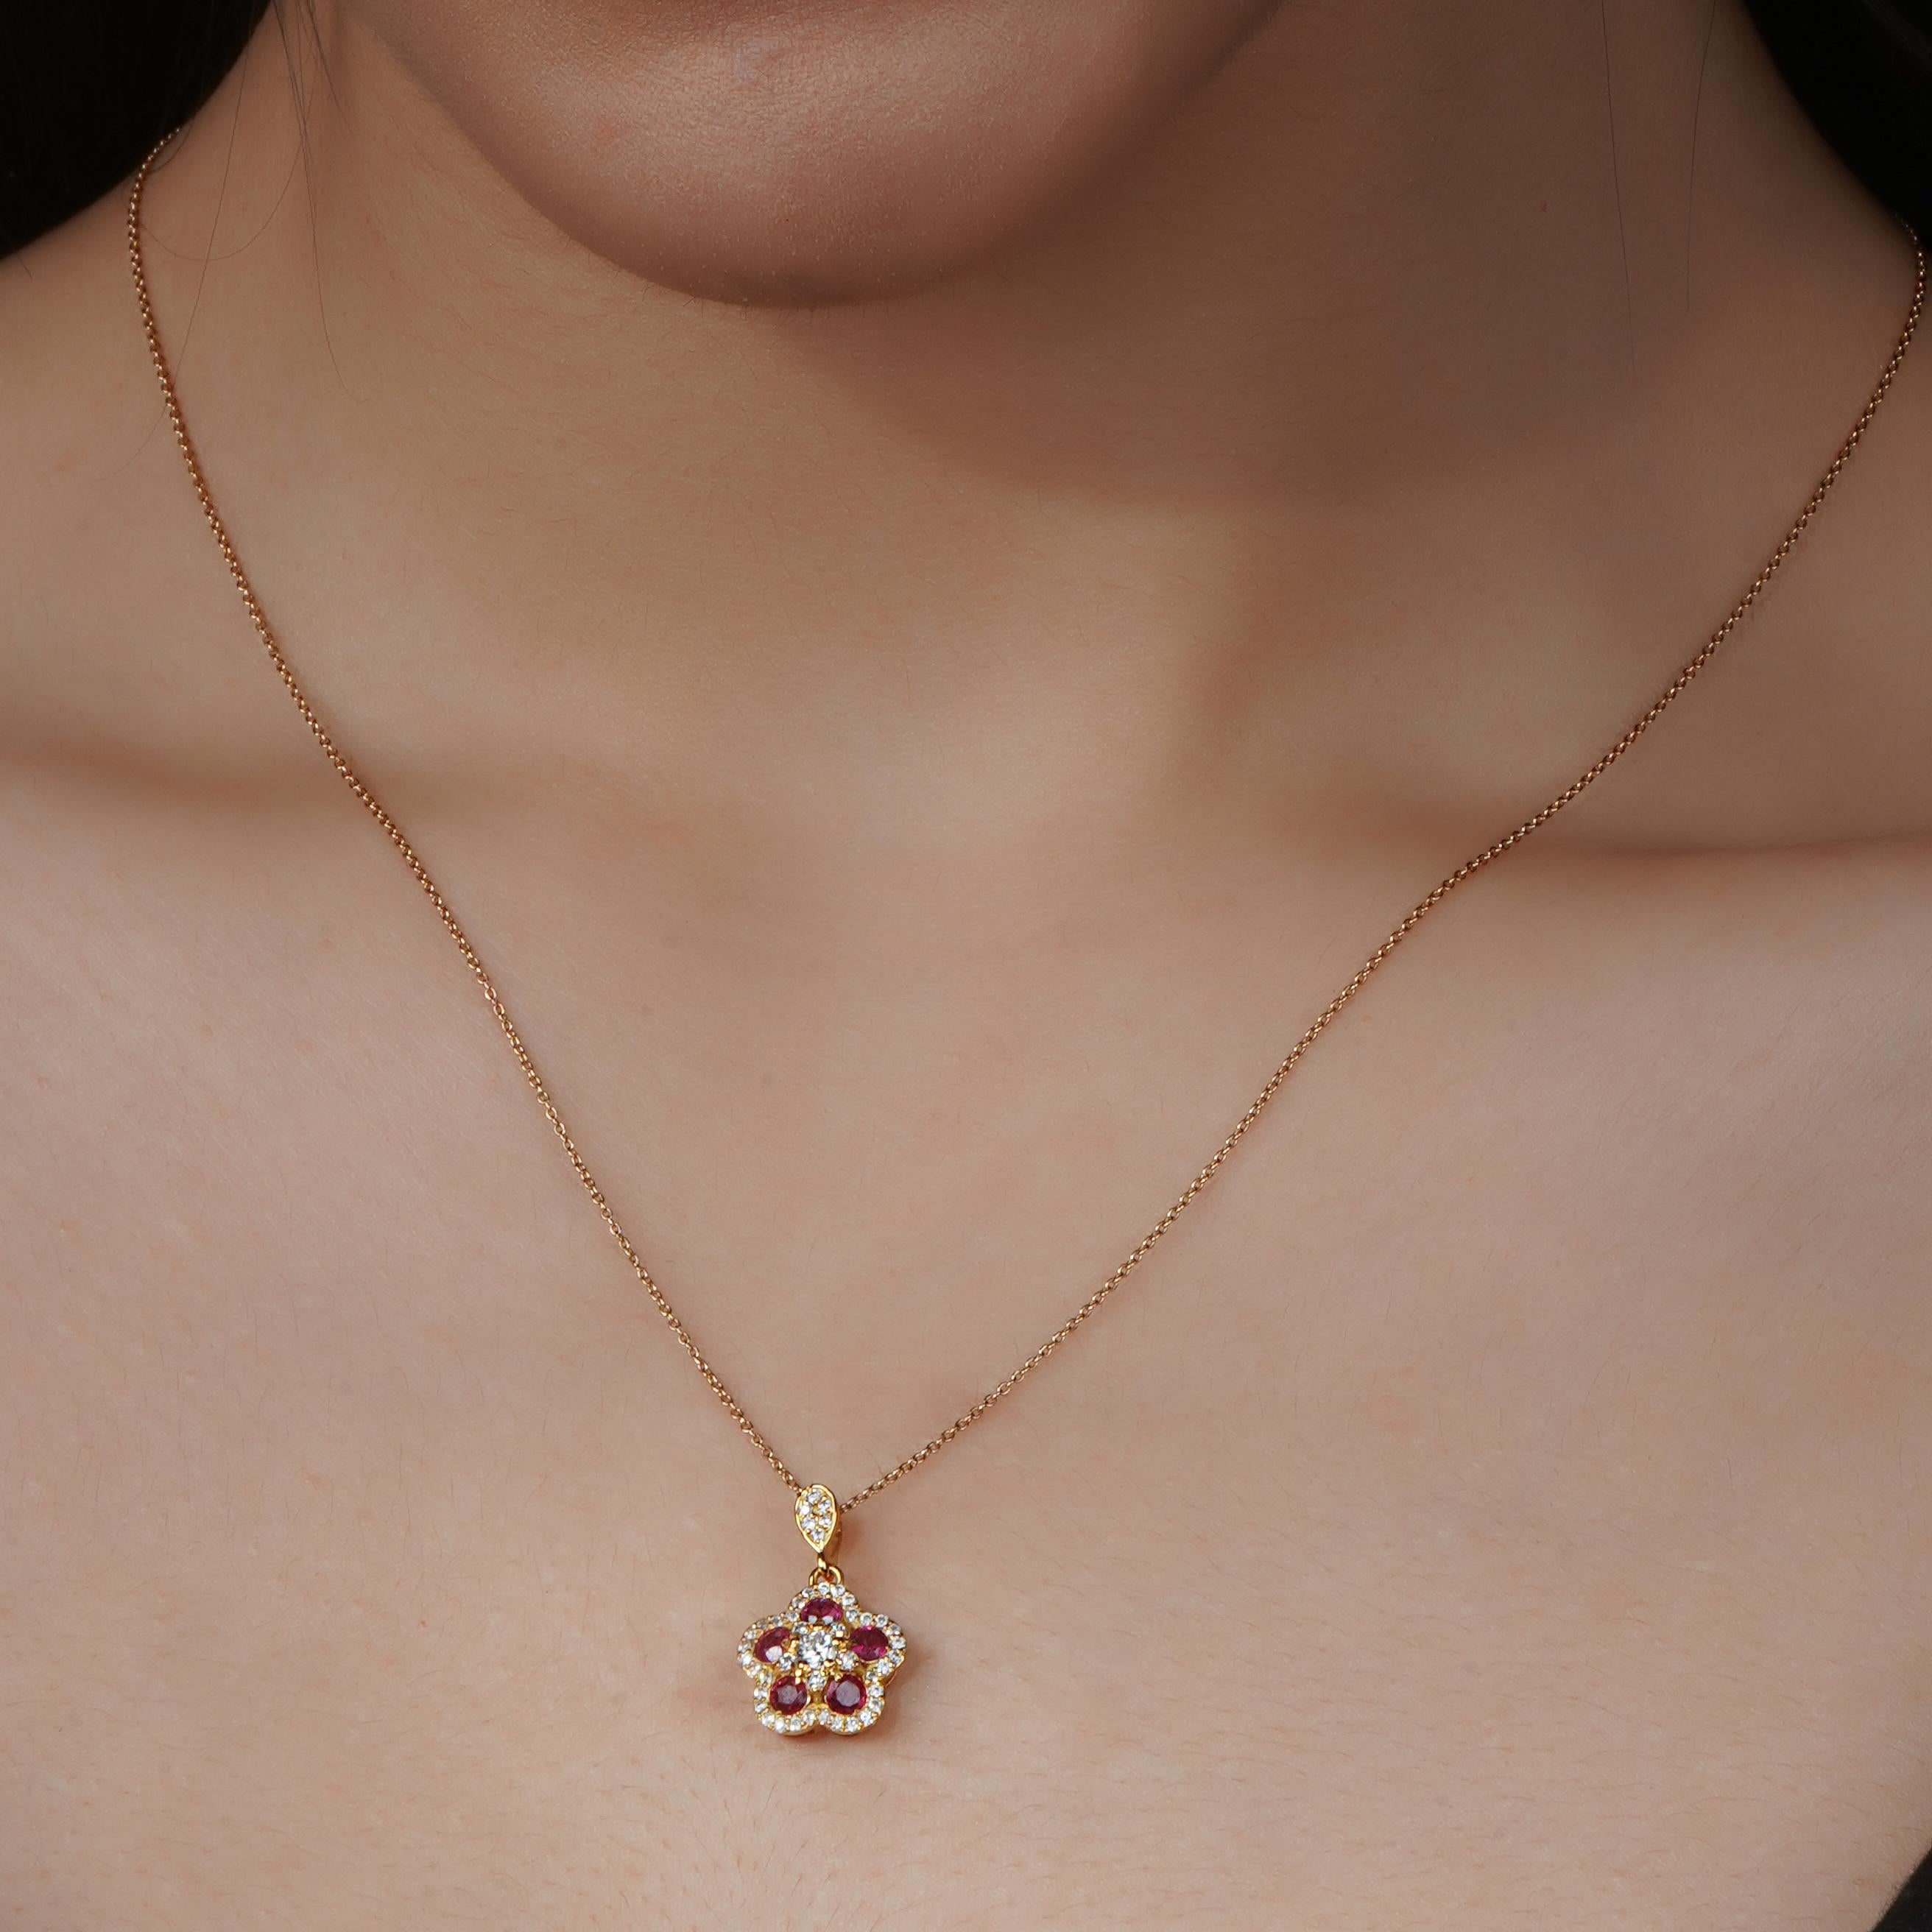 If you are looking for a unique and meaningful gift for yourself or someone special, you will love our 18k solid gold Glory pendant!

**This item is Necklace only and does not include the chain**

This pendant is not just a beautiful accessory, but